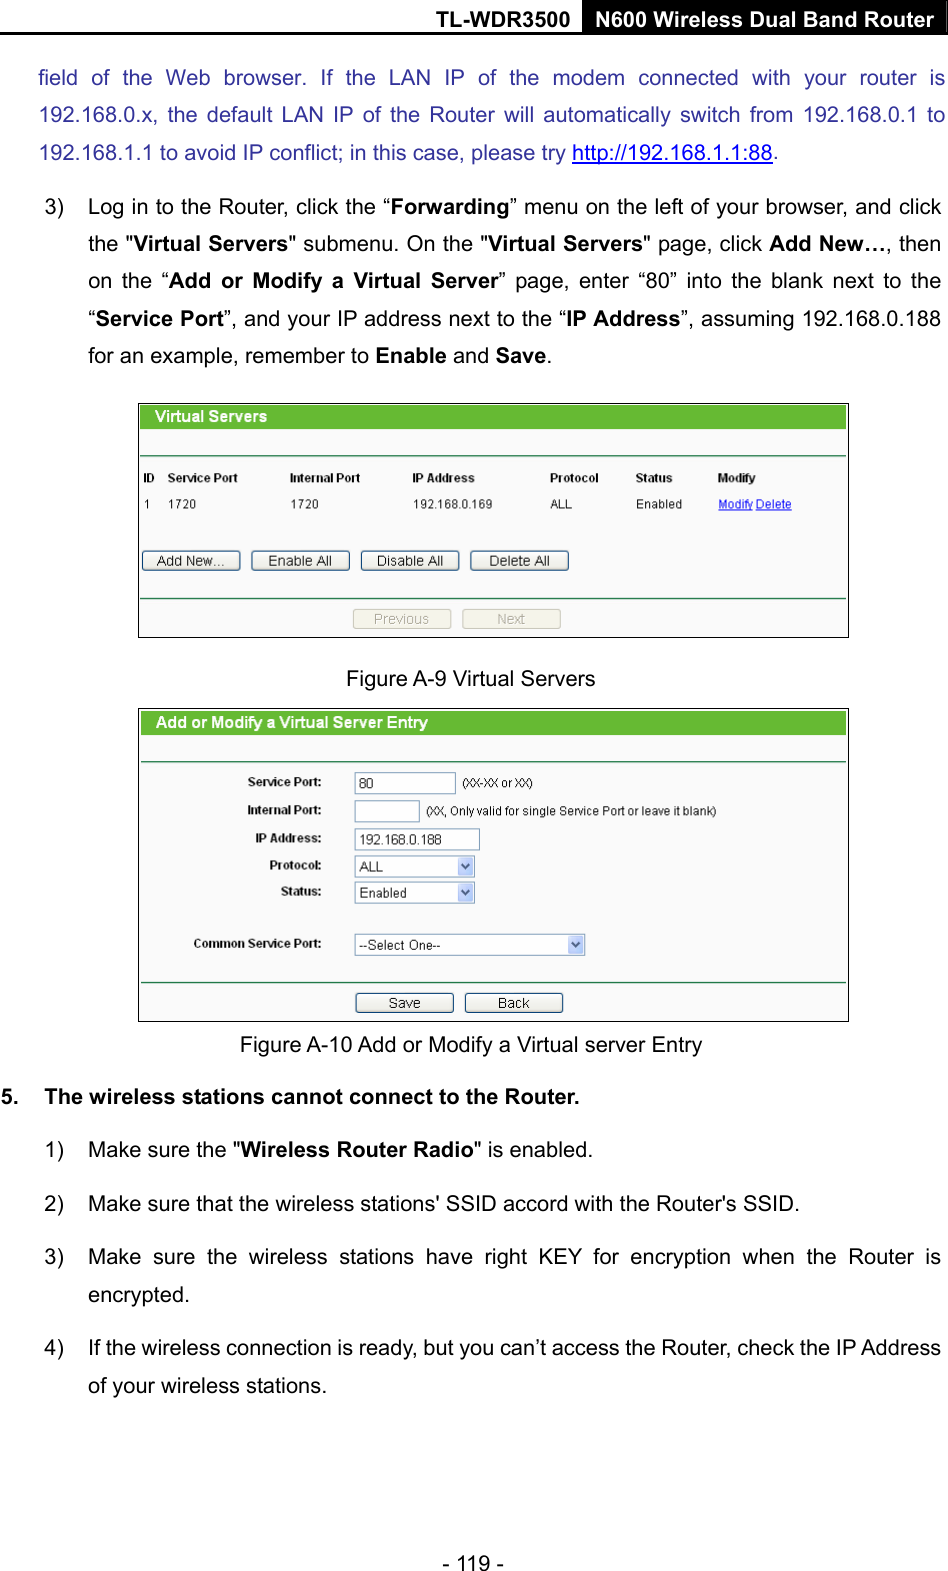 TL-WDR3500 N600 Wireless Dual Band Router - 119 - field of the Web browser. If the LAN IP of the modem connected with your router is 192.168.0.x, the default LAN IP of the Router will automatically switch from 192.168.0.1 to 192.168.1.1 to avoid IP conflict; in this case, please try http://192.168.1.1:88. 3)  Log in to the Router, click the “Forwarding” menu on the left of your browser, and click the &quot;Virtual Servers&quot; submenu. On the &quot;Virtual Servers&quot; page, click Add New…, then on the “Add or Modify a Virtual Server” page, enter “80” into the blank next to the “Service Port”, and your IP address next to the “IP Address”, assuming 192.168.0.188 for an example, remember to Enable and Save.  Figure A-9 Virtual Servers  Figure A-10 Add or Modify a Virtual server Entry 5.  The wireless stations cannot connect to the Router. 1)  Make sure the &quot;Wireless Router Radio&quot; is enabled. 2)  Make sure that the wireless stations&apos; SSID accord with the Router&apos;s SSID. 3)  Make sure the wireless stations have right KEY for encryption when the Router is encrypted. 4)  If the wireless connection is ready, but you can’t access the Router, check the IP Address of your wireless stations. 